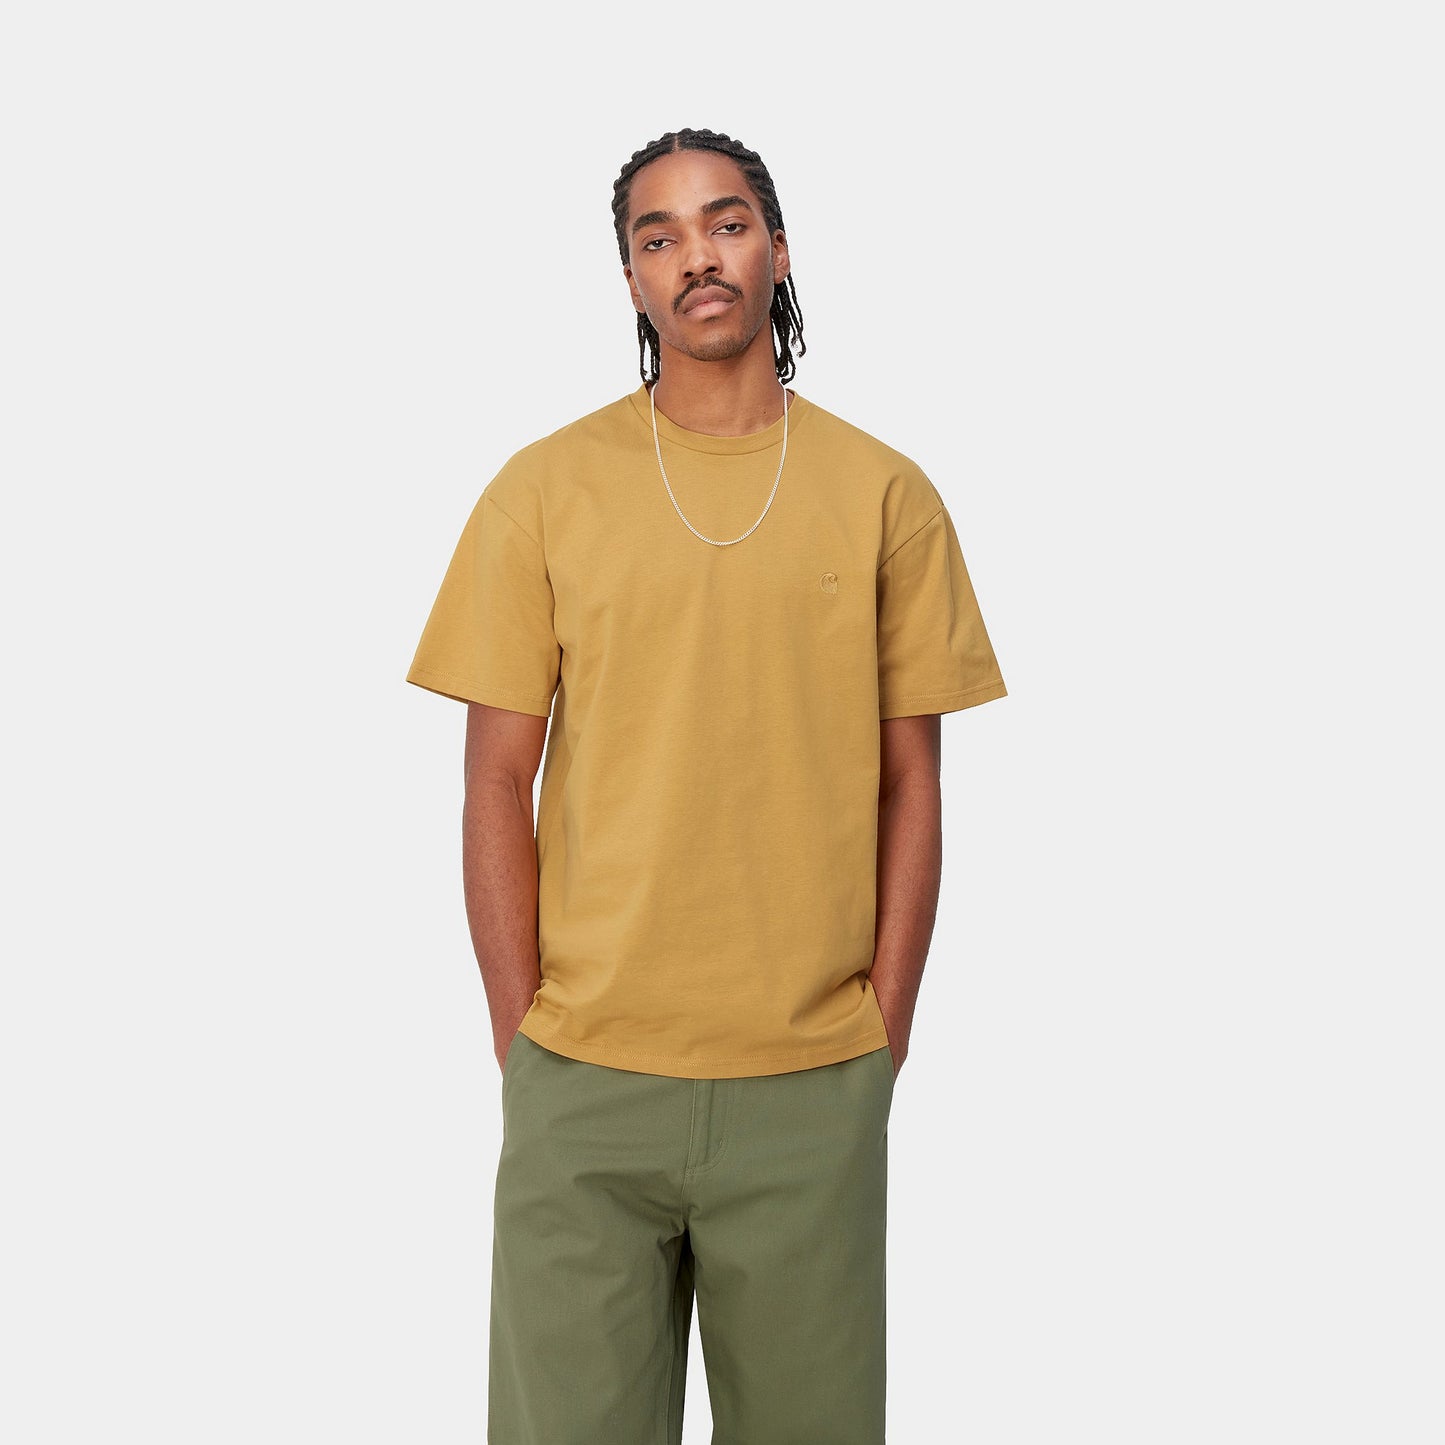 CARHARTT WIP S/S CHASE T-Shirt - Sunray Gold